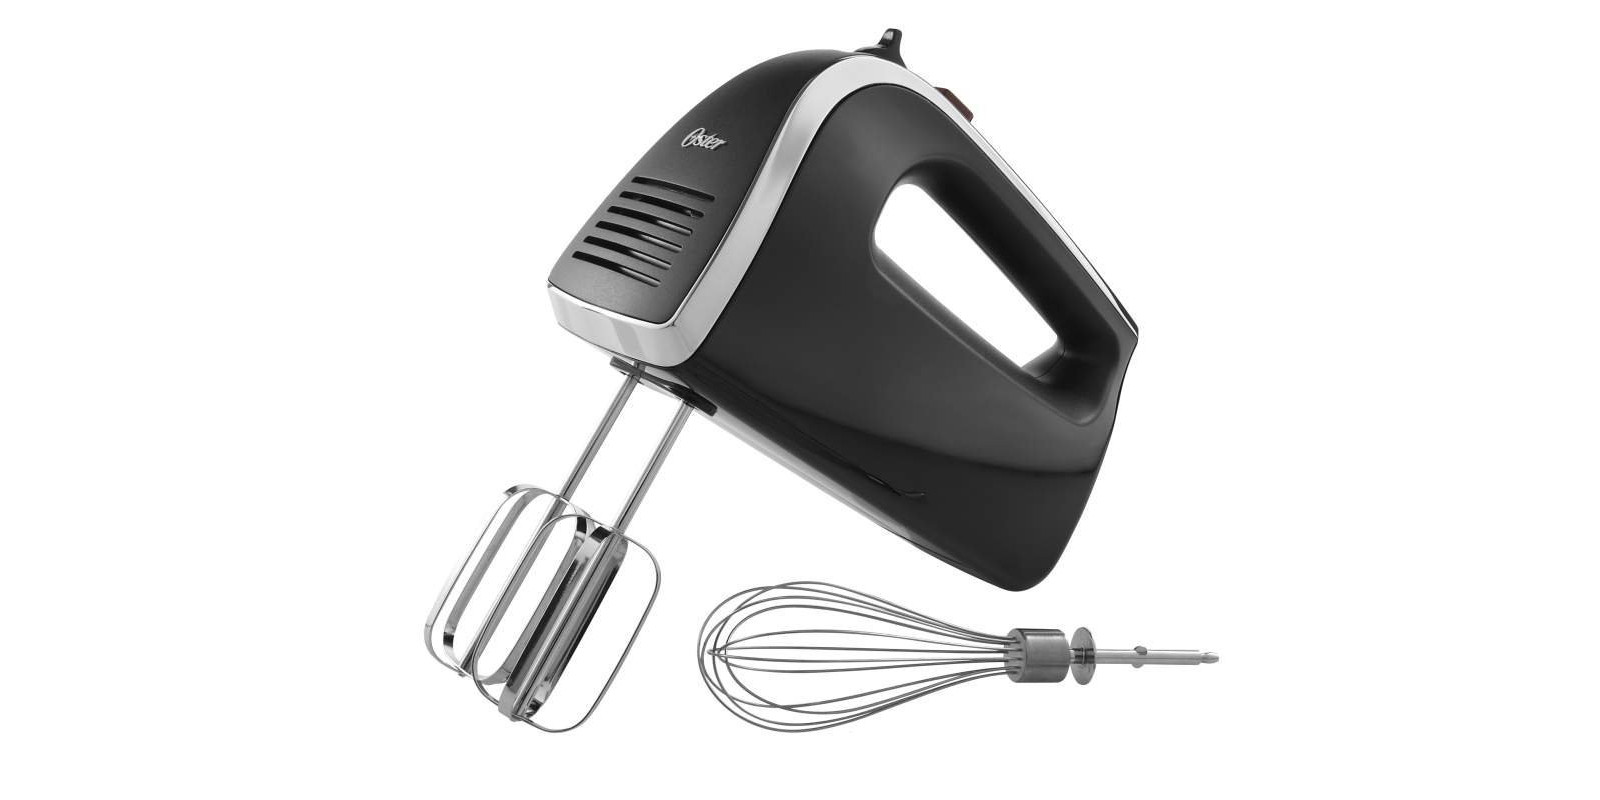 Home: Oster Hand Mixer w/ Retractable Cord $14 (Orig. $30), Digital  BBQ/Cooking Thermometer $10 (Orig. $20), more